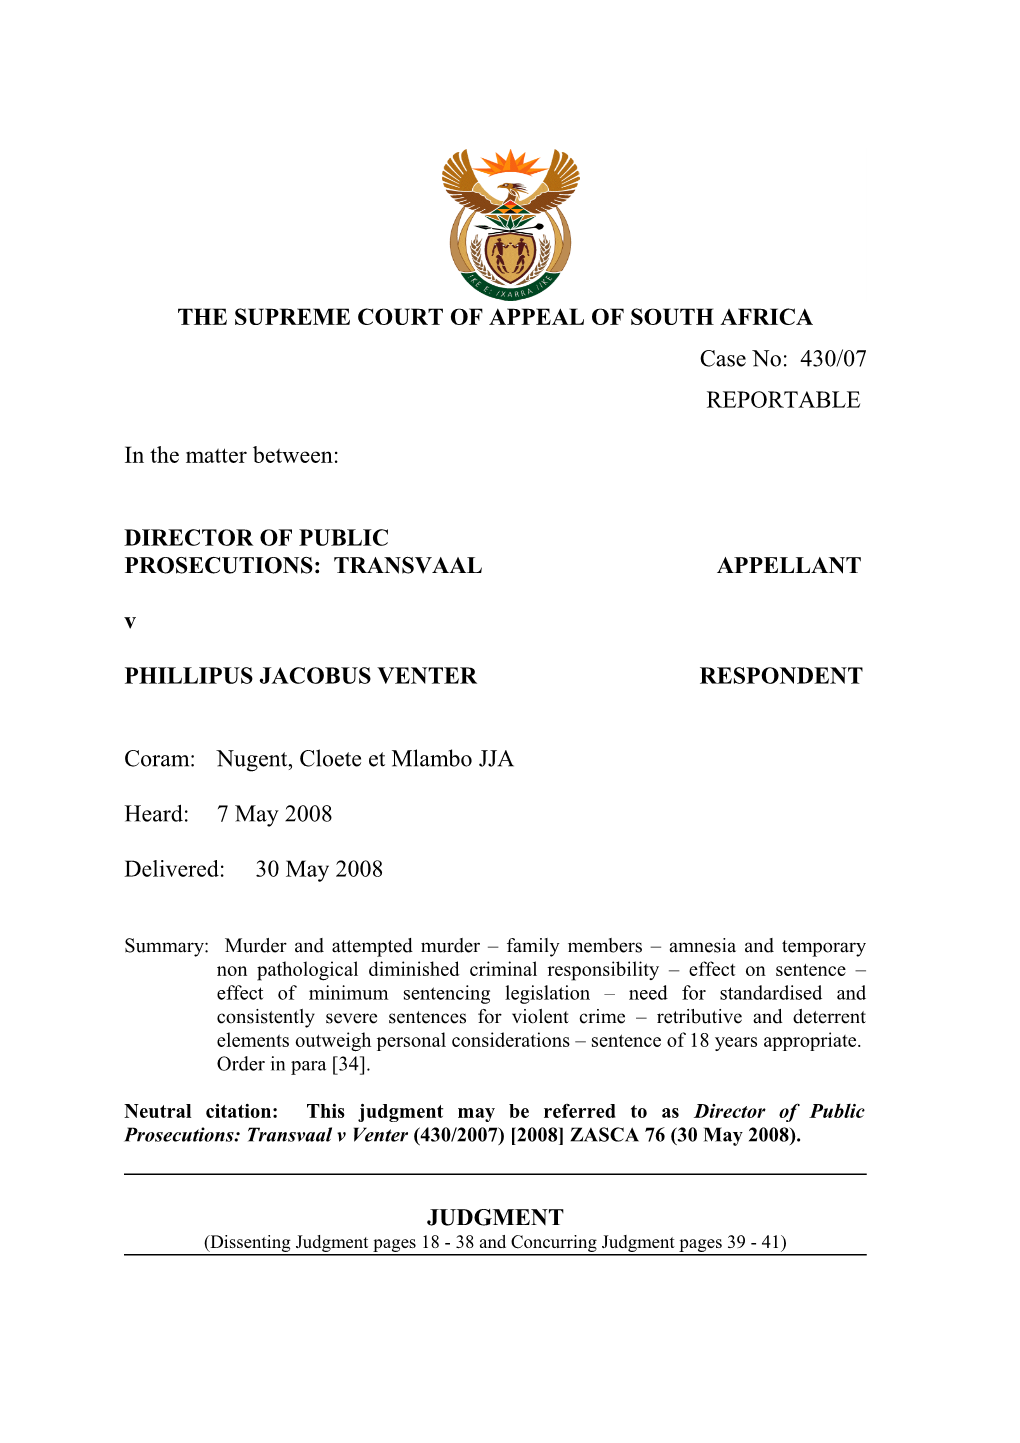 The Supreme Court of Appeal of South Africa s2